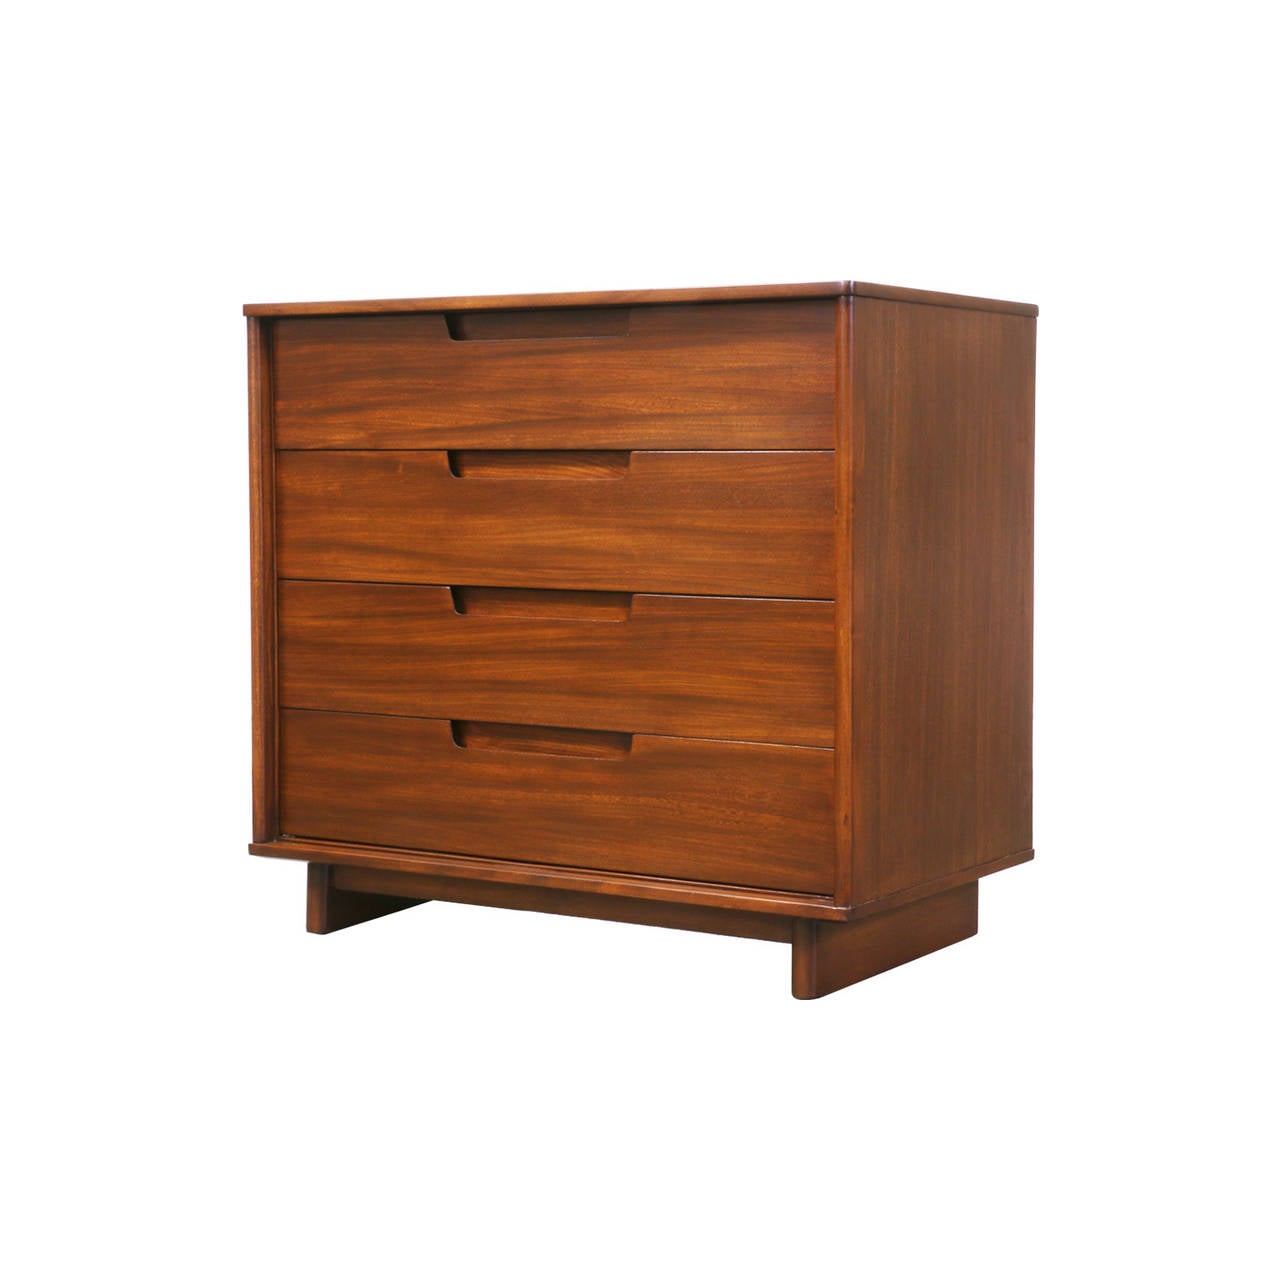 Designer: Milo Baughman
Manufacturer: Drexel “Today’s Living”
Period/Style: Mid Century Modern
Country: United States
Date: 1950’s

Dimensions: 29.25″H x 32″W x 18.25″D
Materials: Walnut
Condition: Excellent – Newly Refinished
Number of